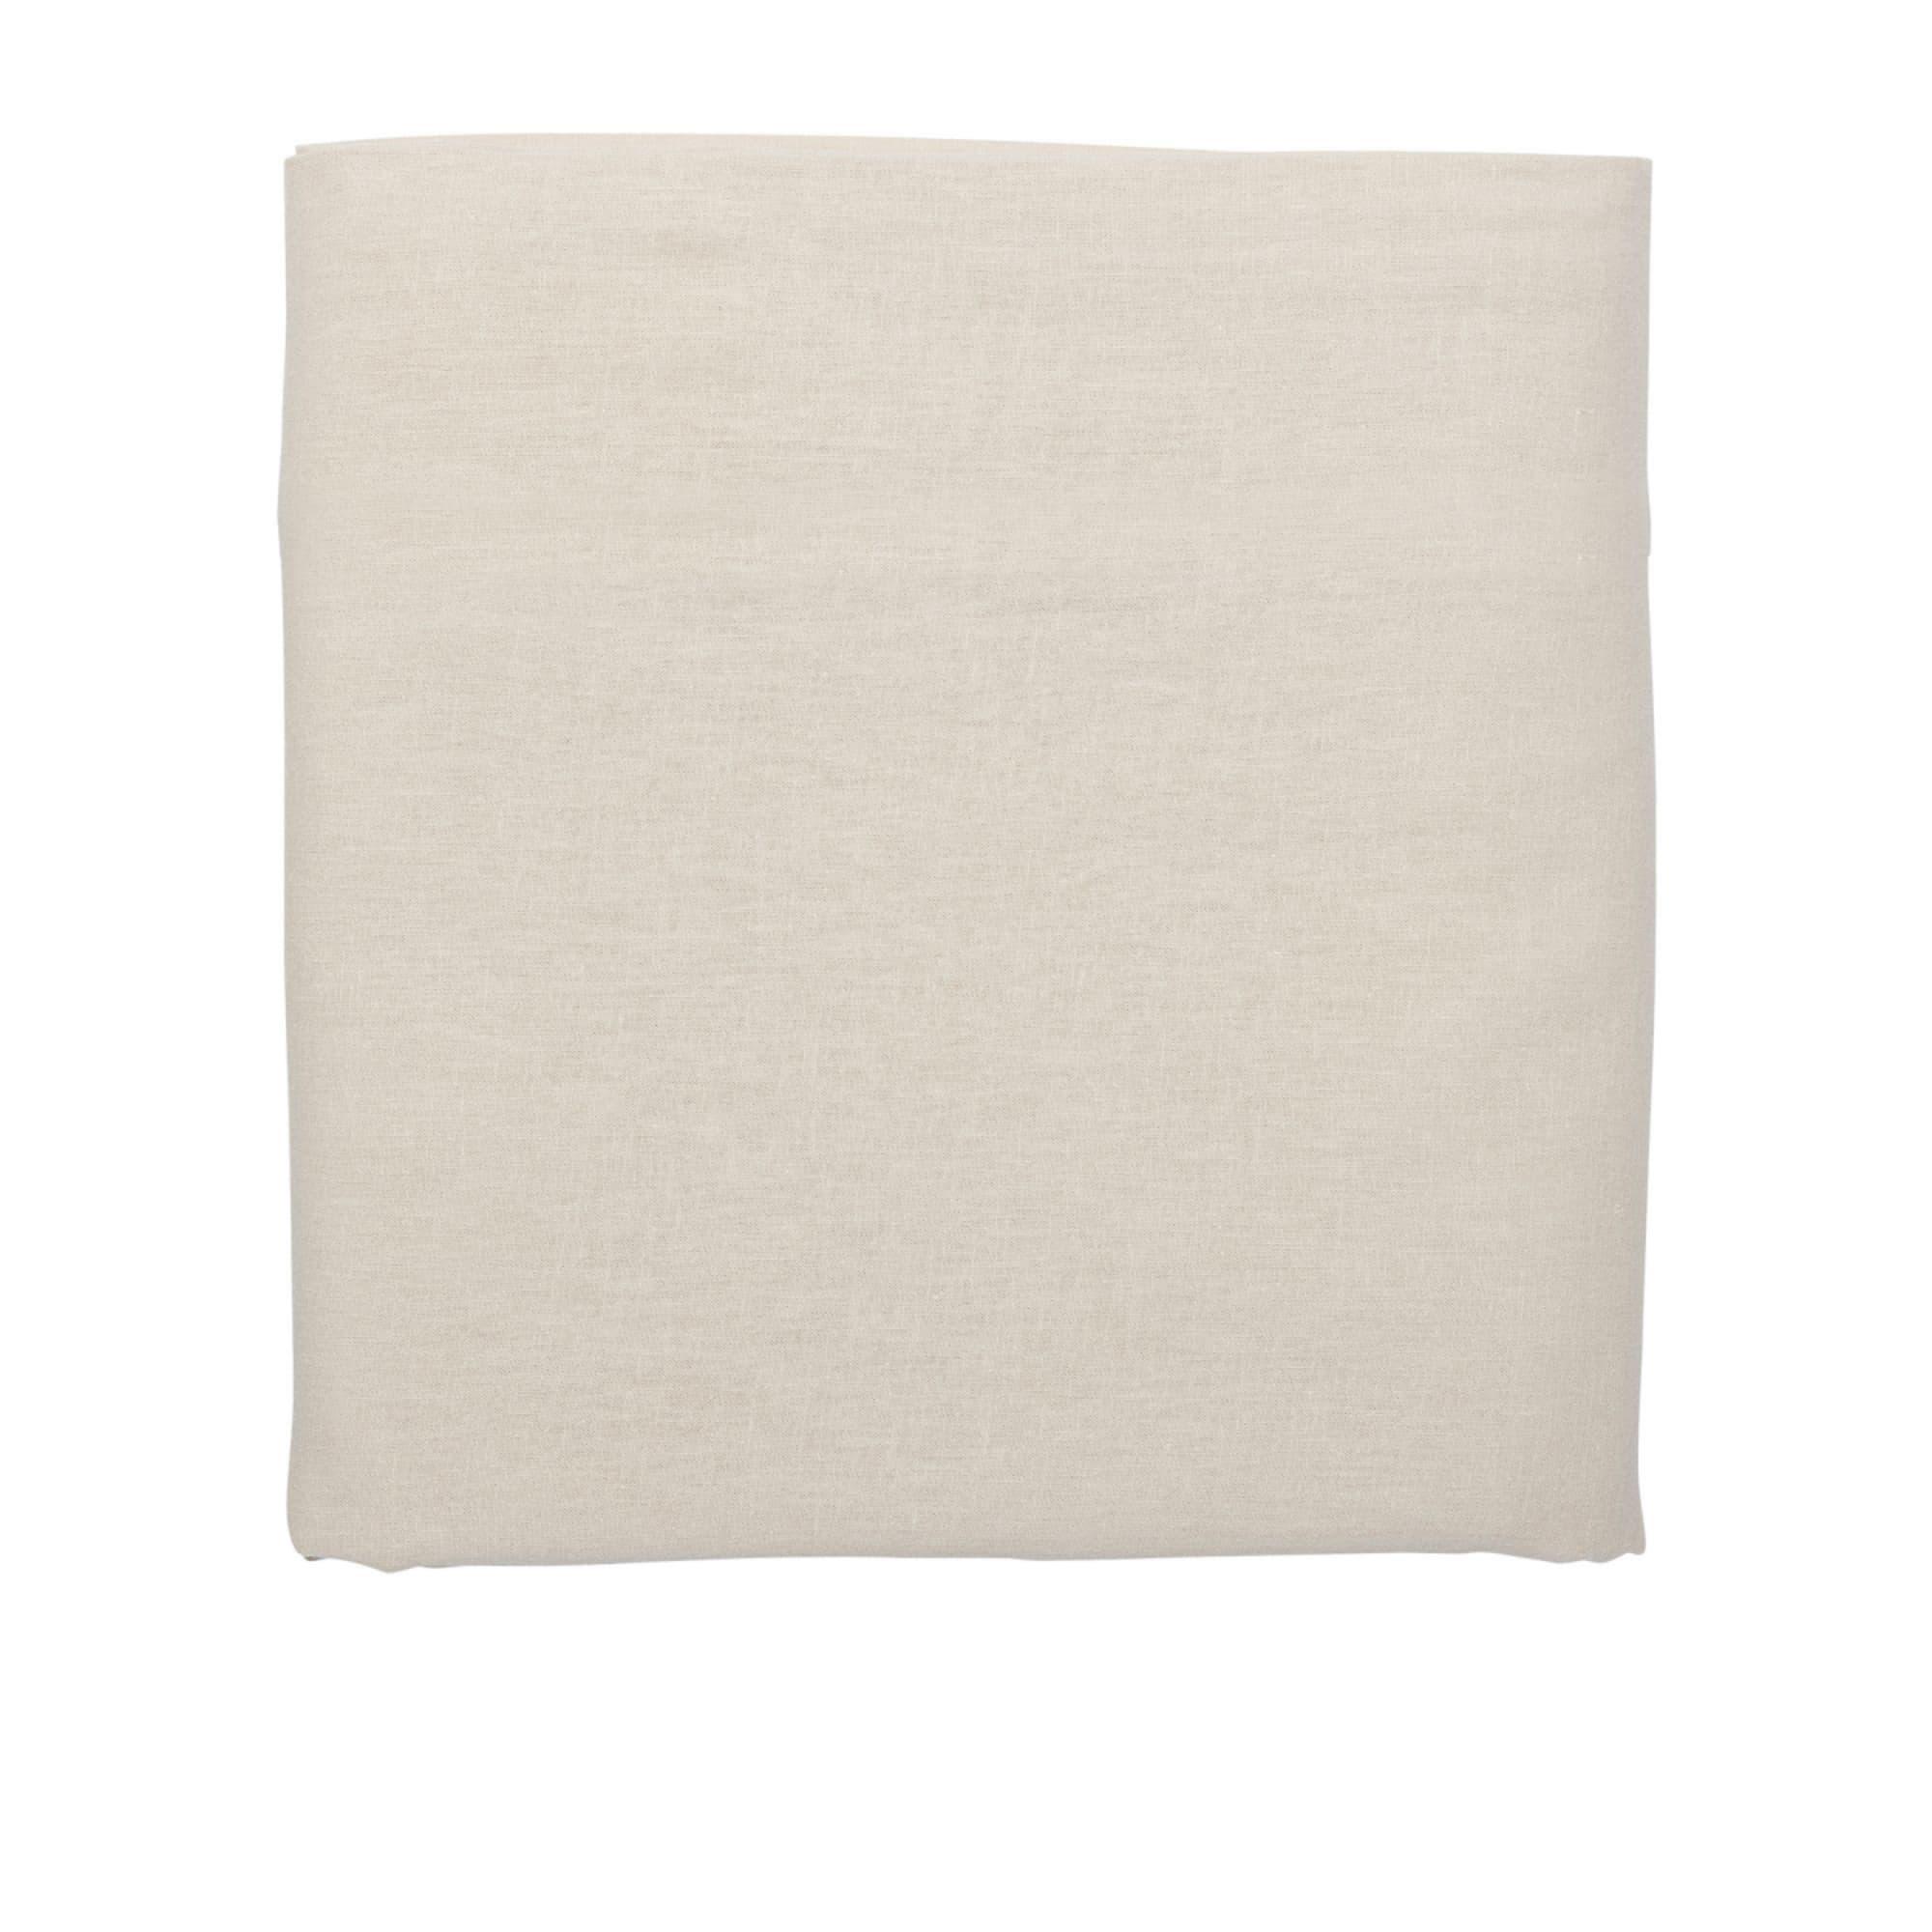 Ecology Dream Fitted Sheet King Stone Image 1